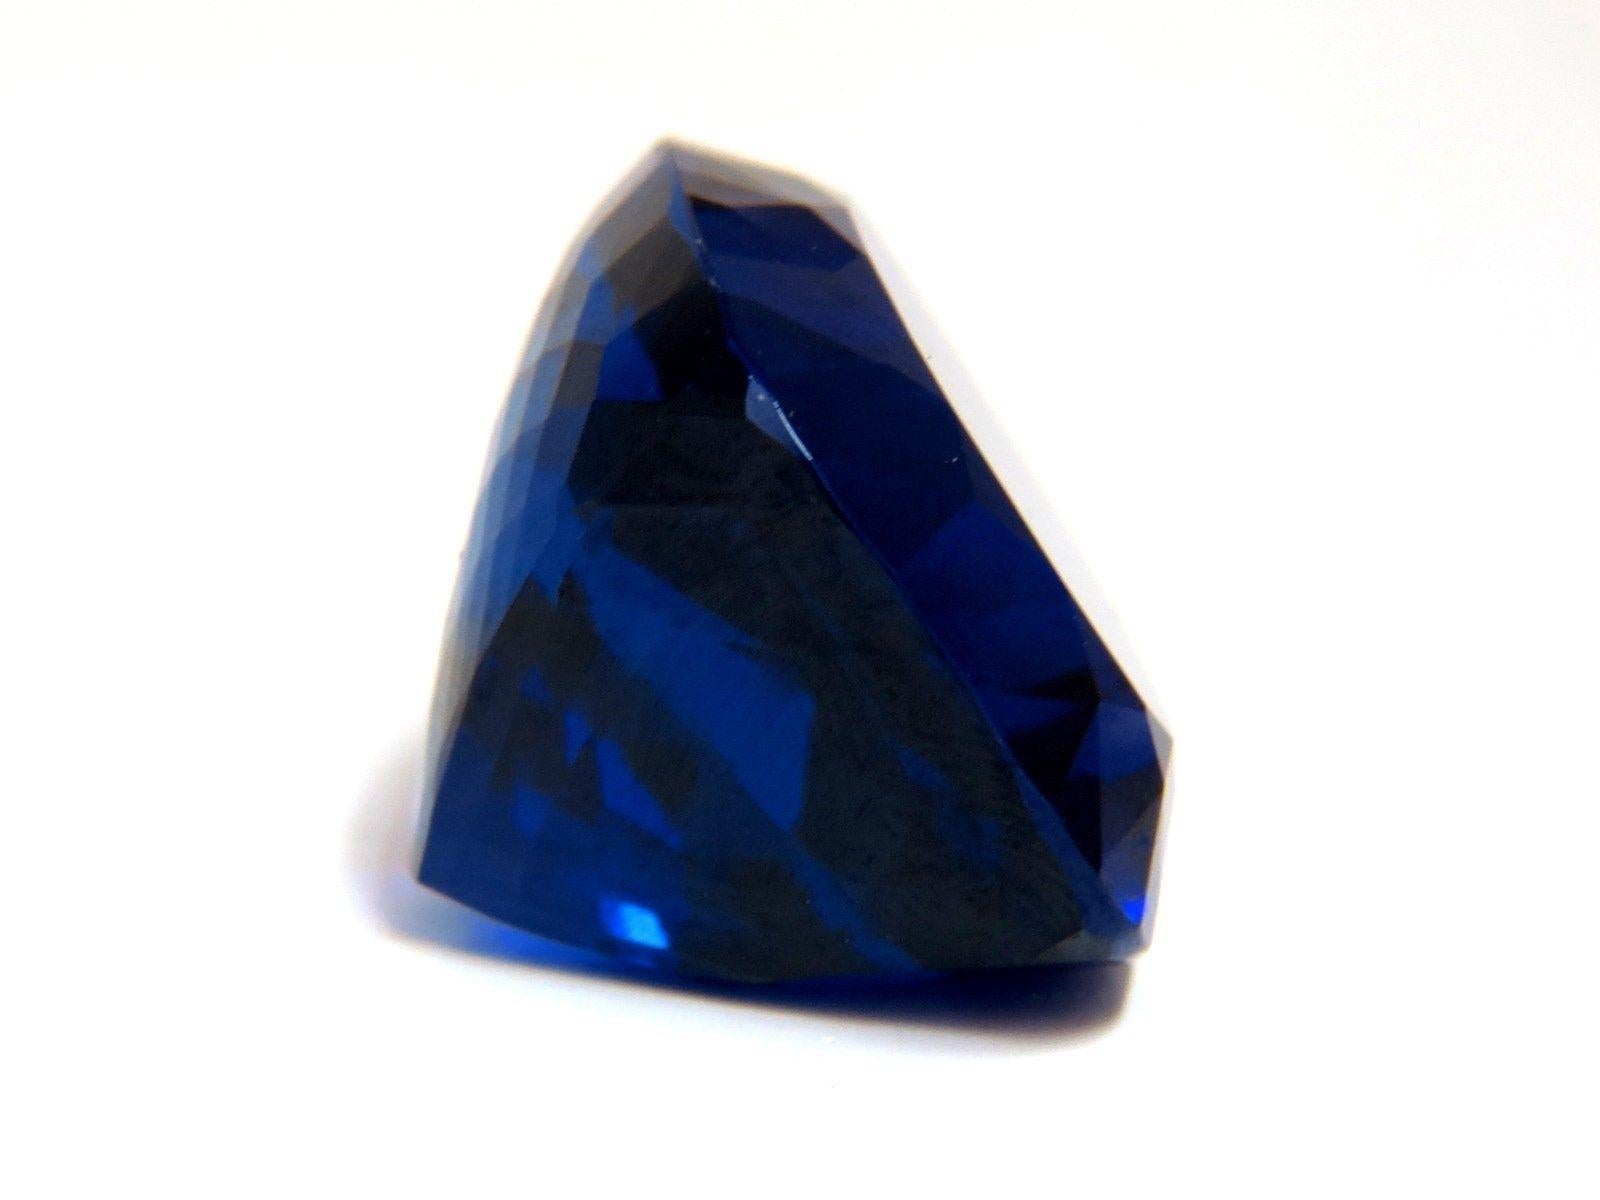 Tanzanite Royale.

GIA CERTIFIED
58.21ct. Natural Tanzanite

Clean VVS Clarity

Cushion Cut

Full transparency 

Classic vivid blue to violet color

24.58 X 19.51 X 16.07mm

GIA Report #: 2135134702

A colorful tangible investment.